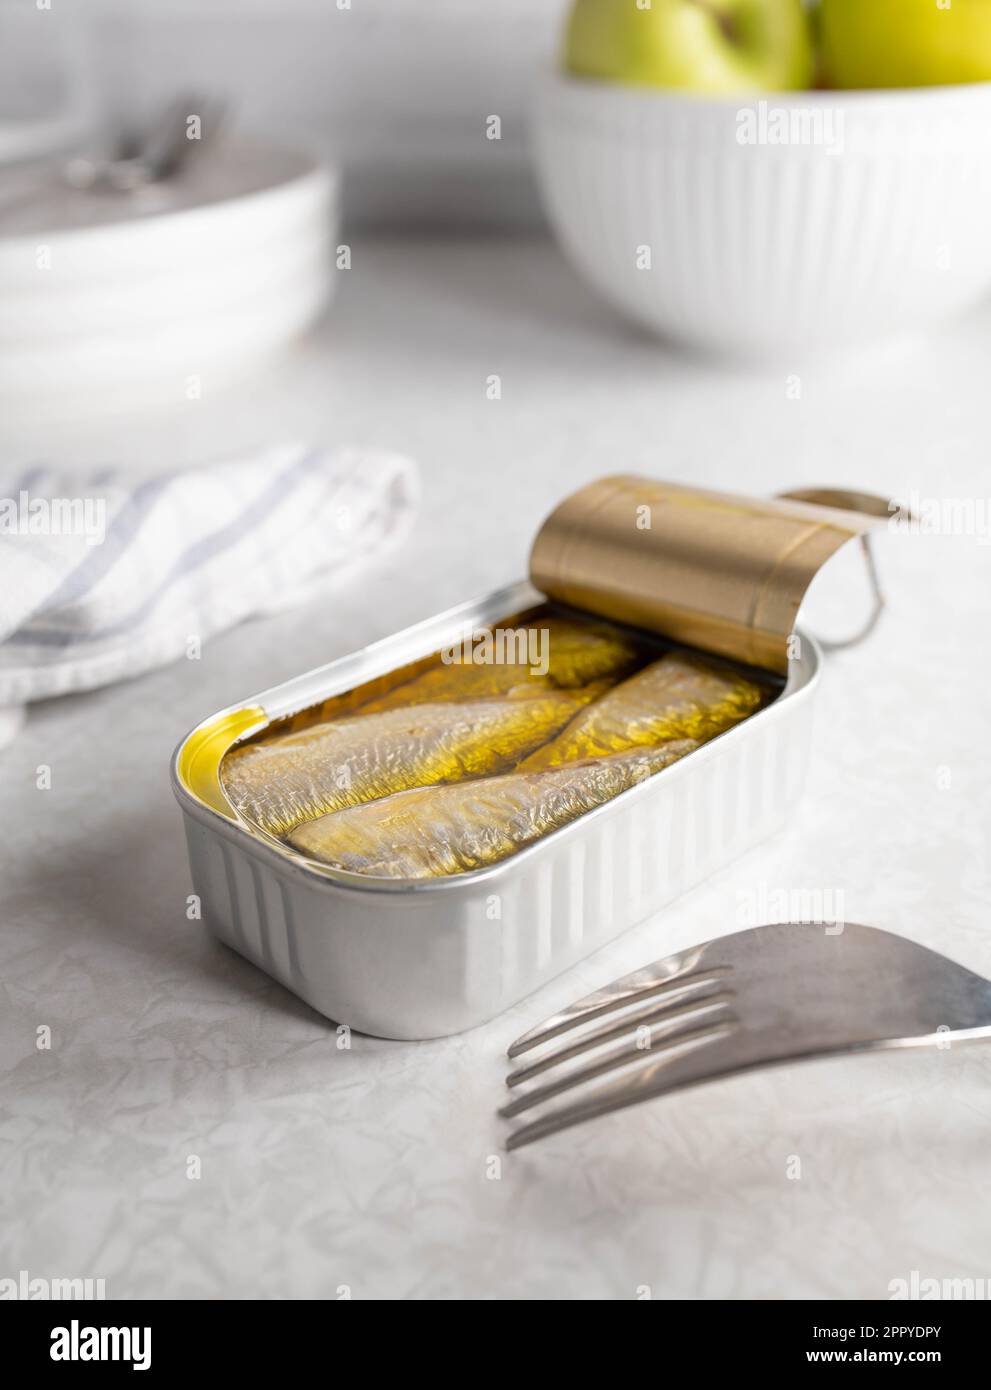 Canned sardines on kitchen table Stock Photo